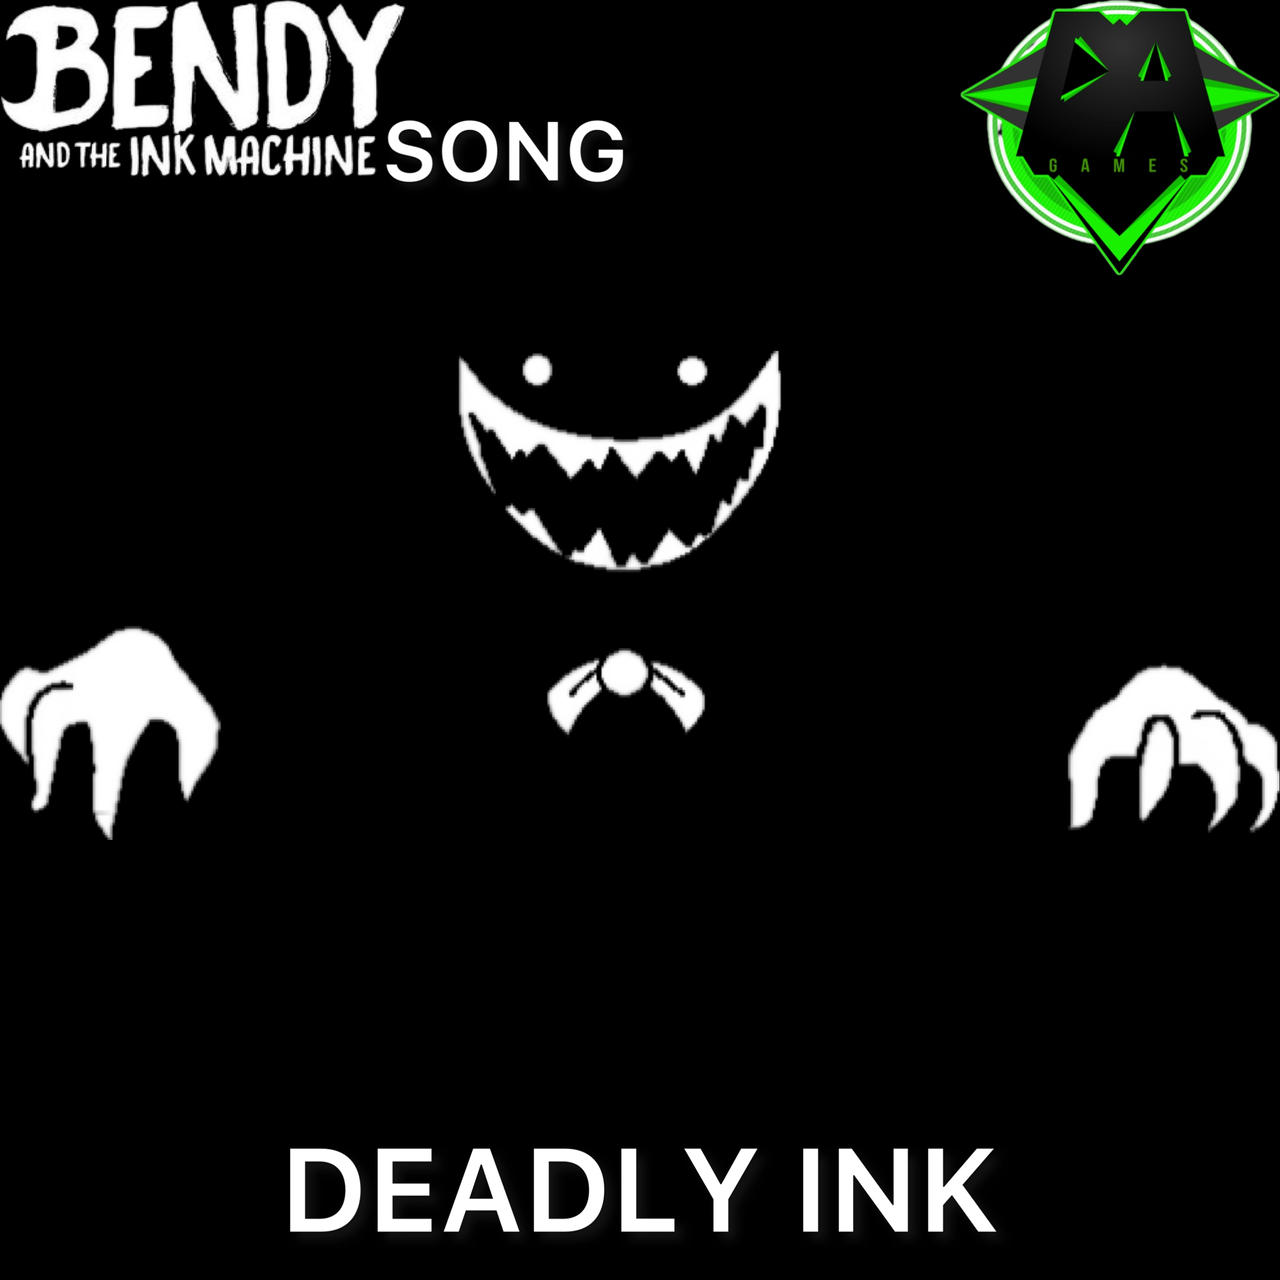 Bendy chapter 3 song deadly ink dagames (updated) by Yiannis-Bournelis on  DeviantArt